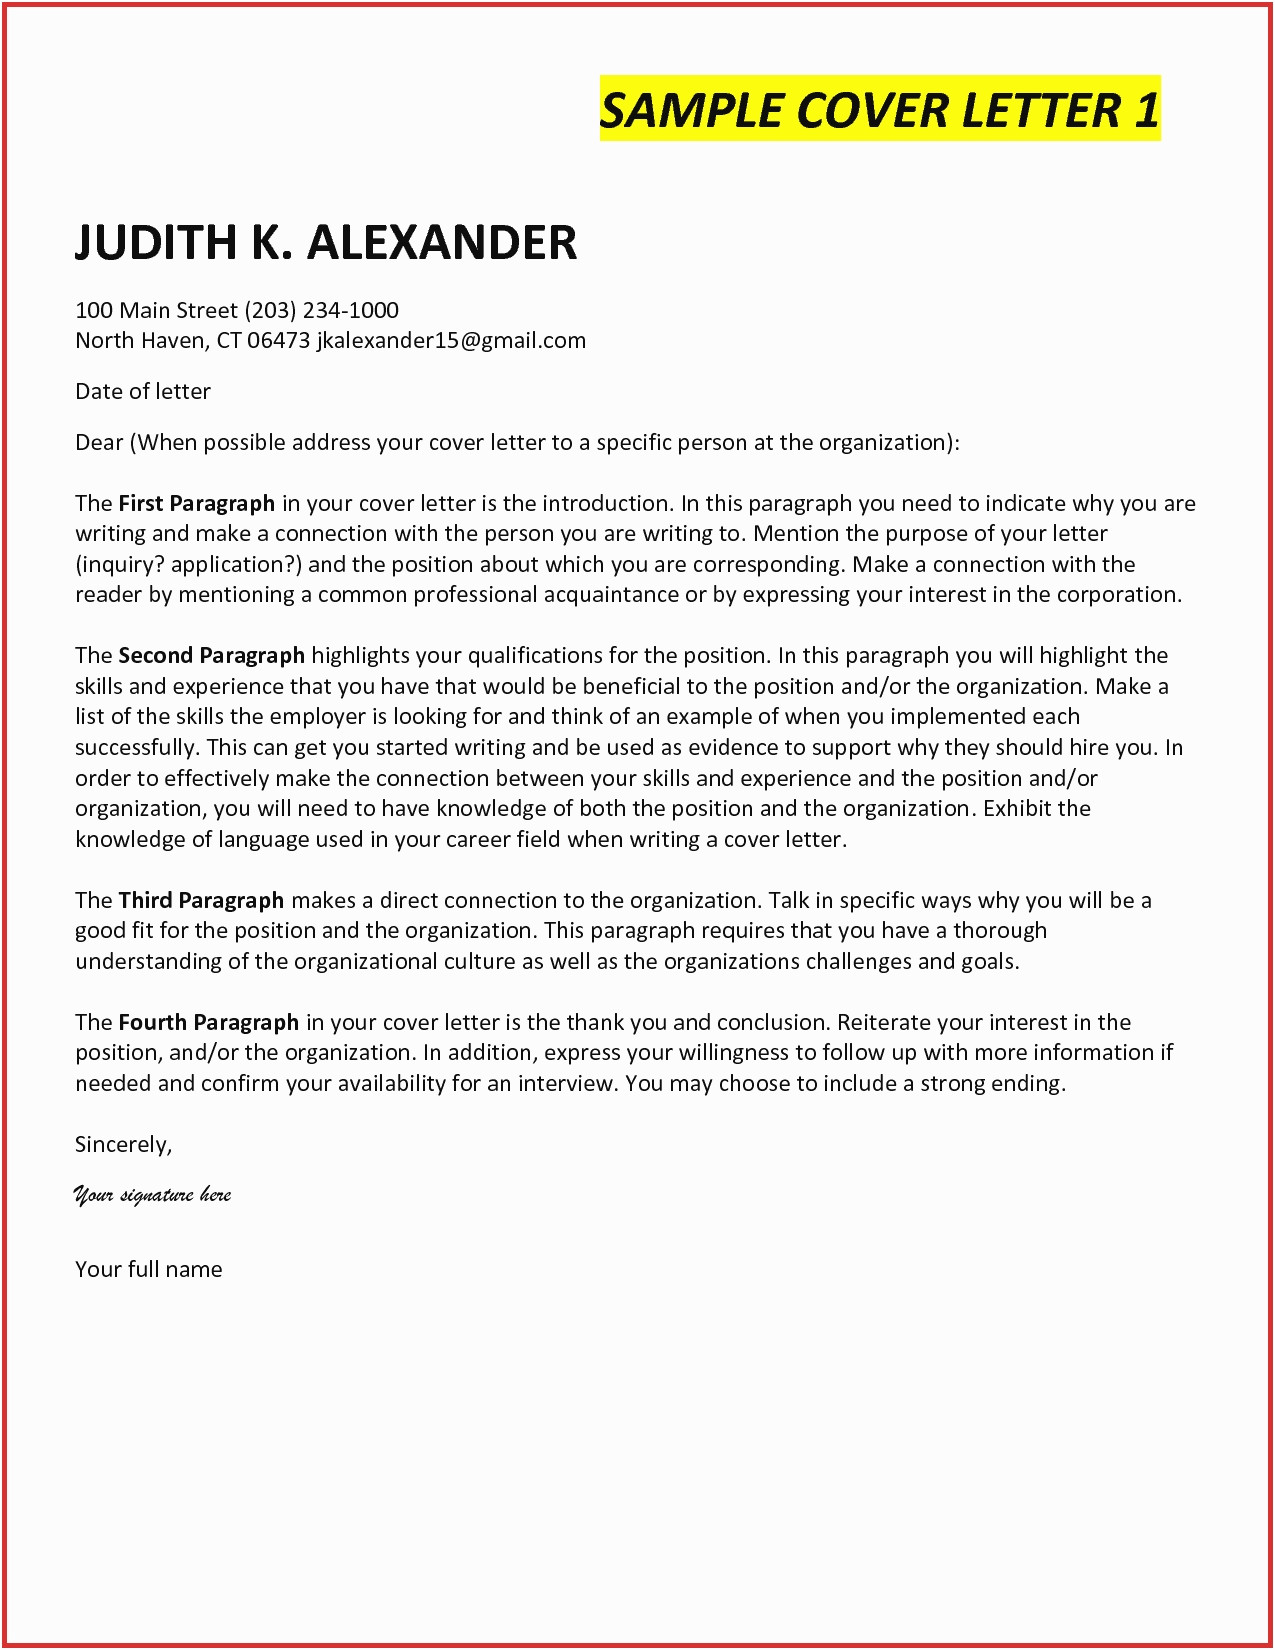 letter of introduction template lovely good opening lines for cover letters choice image cover letter sample